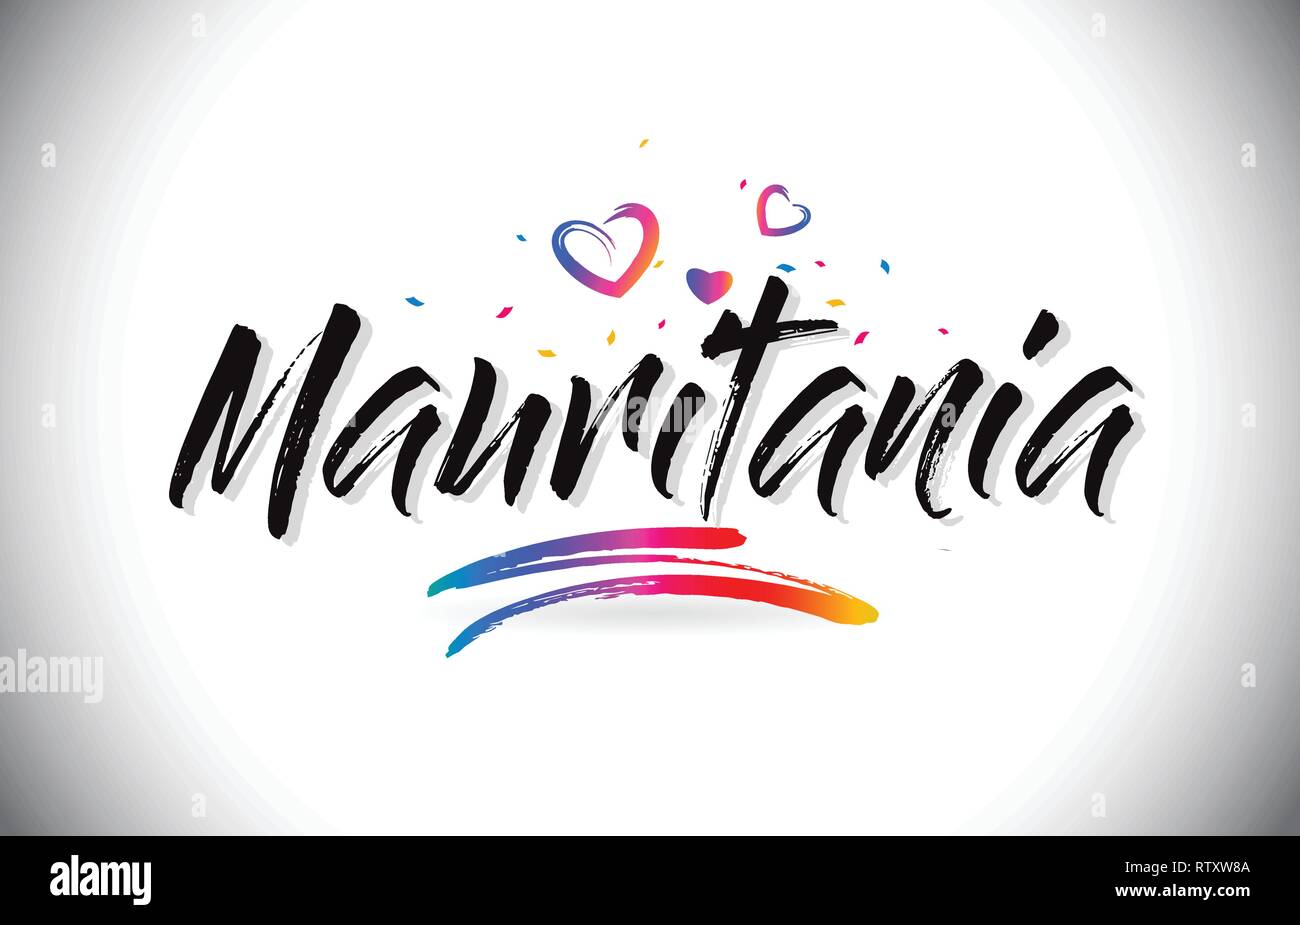 Mauritania Welcome To Word Text with Love Hearts and Creative Handwritten Font Design Vector Illustration. Stock Vector